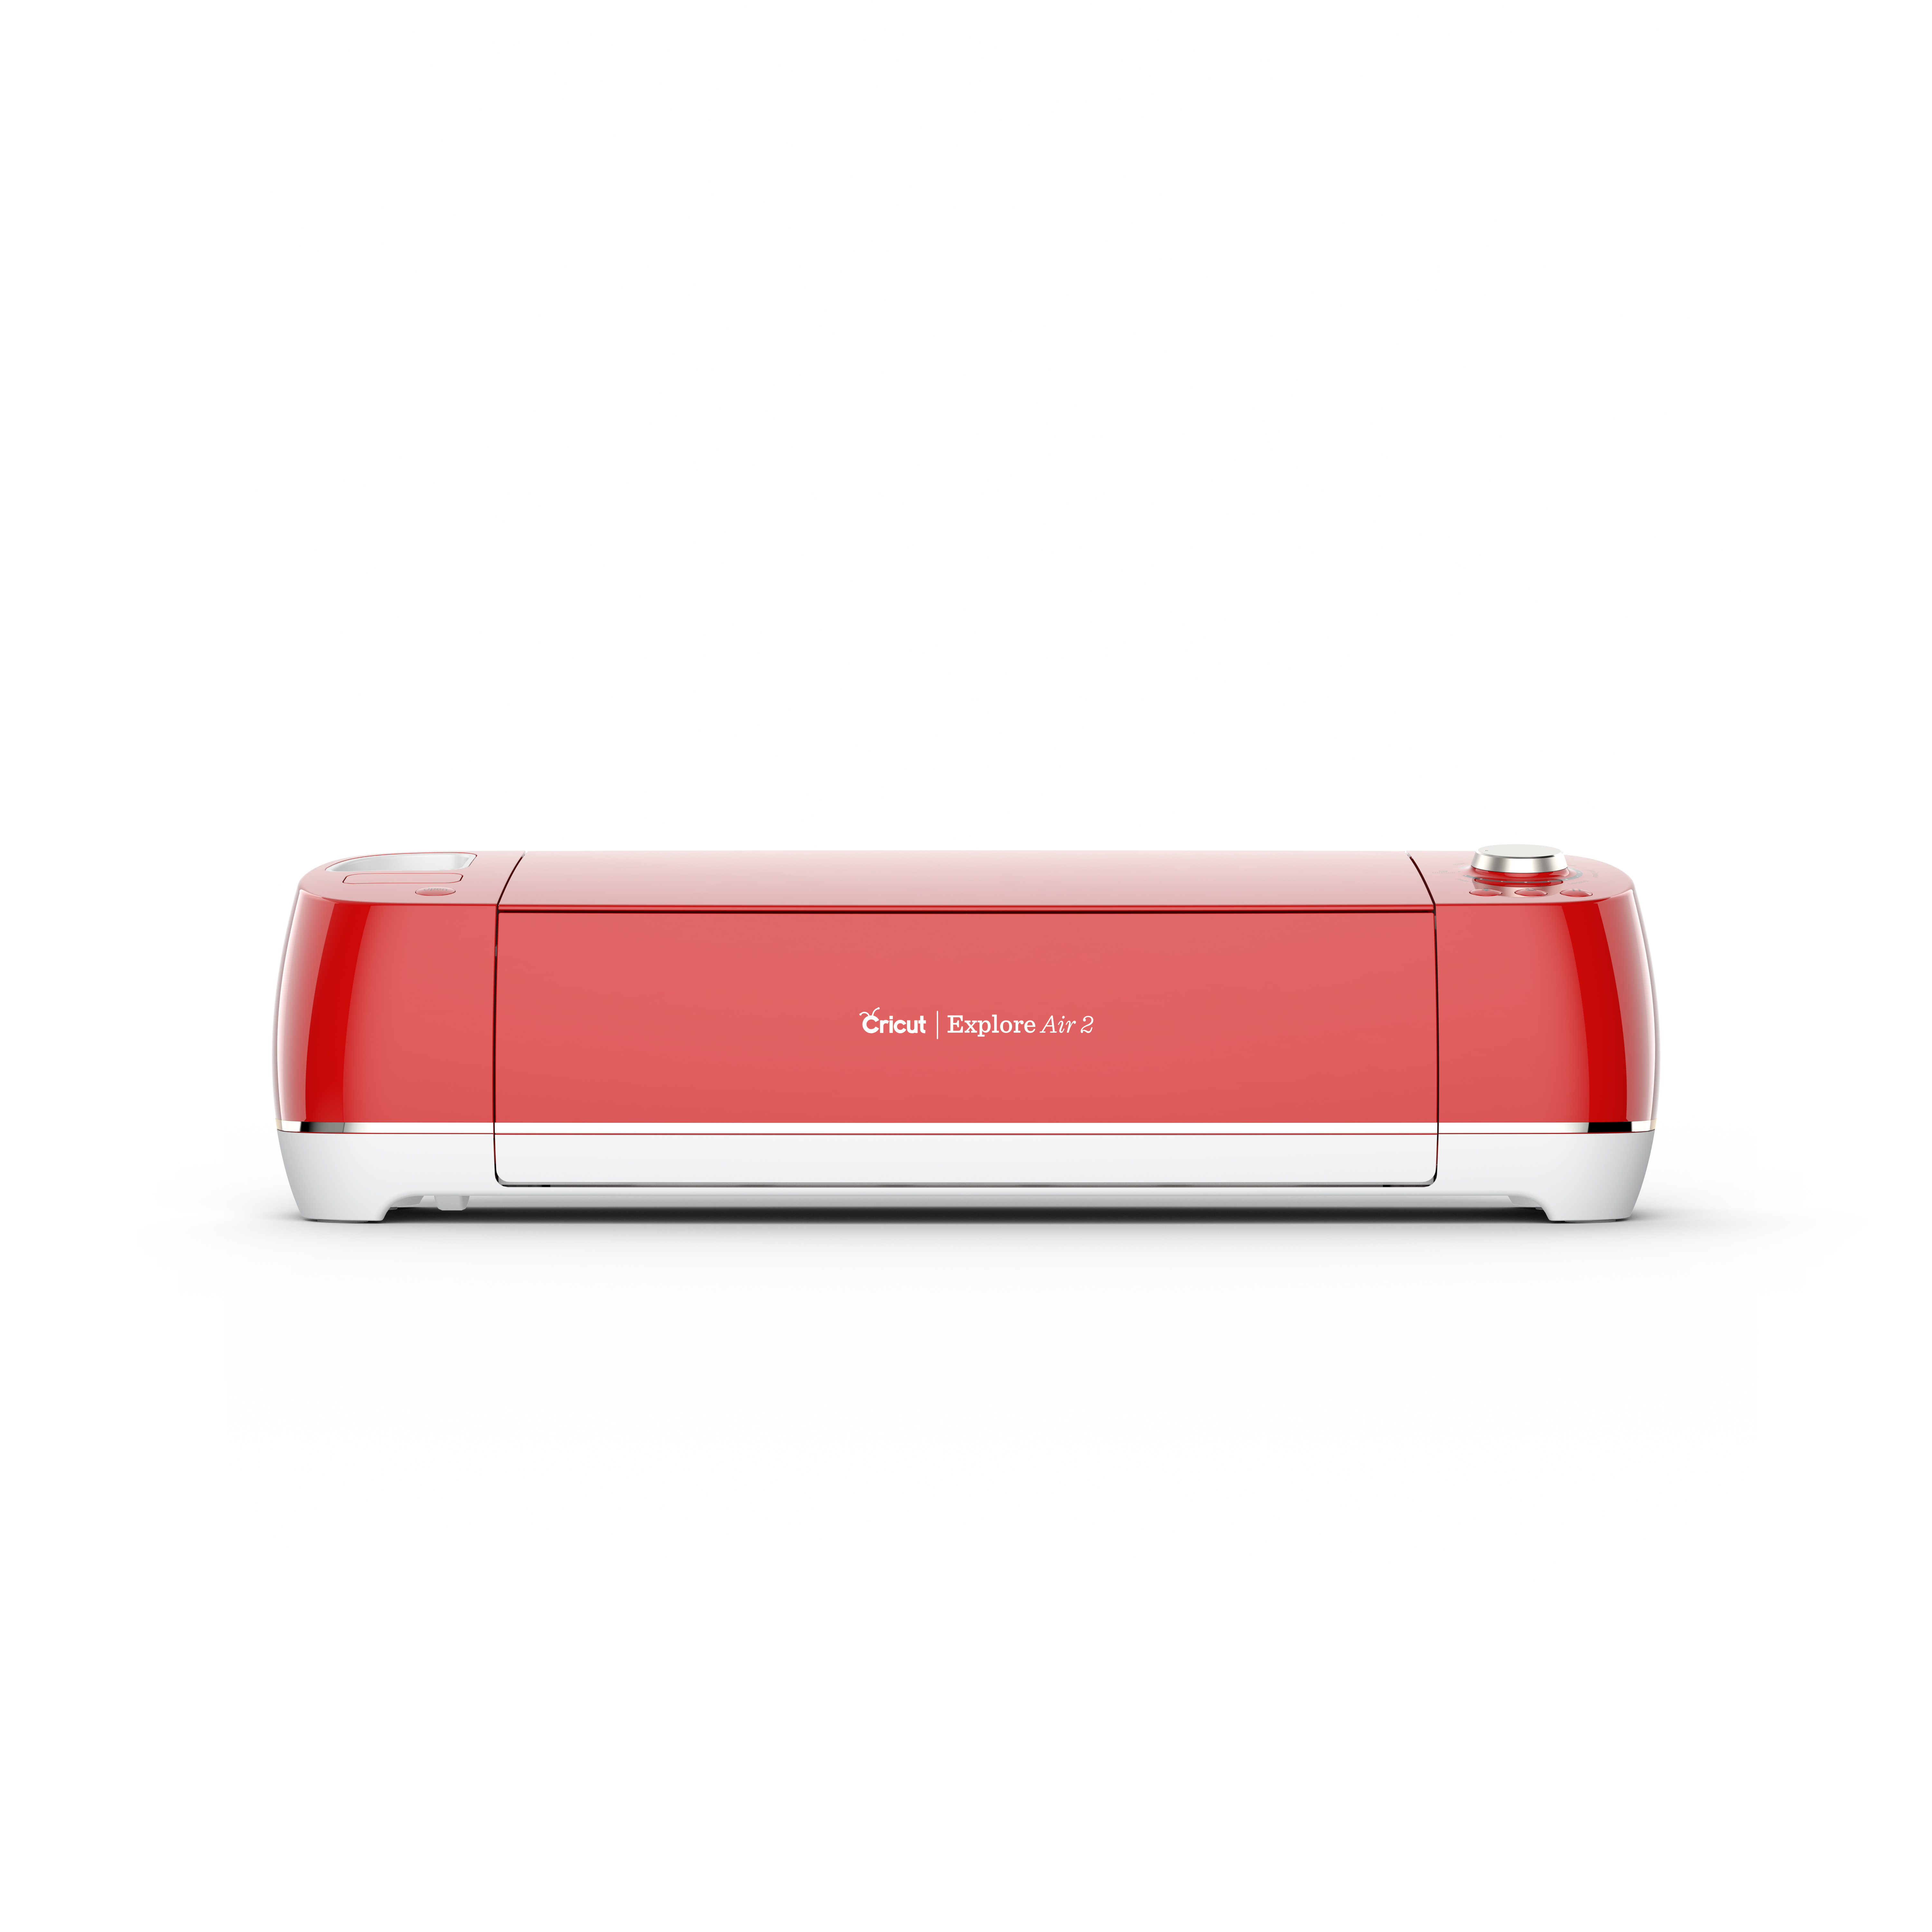 Cricut Explore Air 2 Candy Apple Red Machine - image 1 of 5